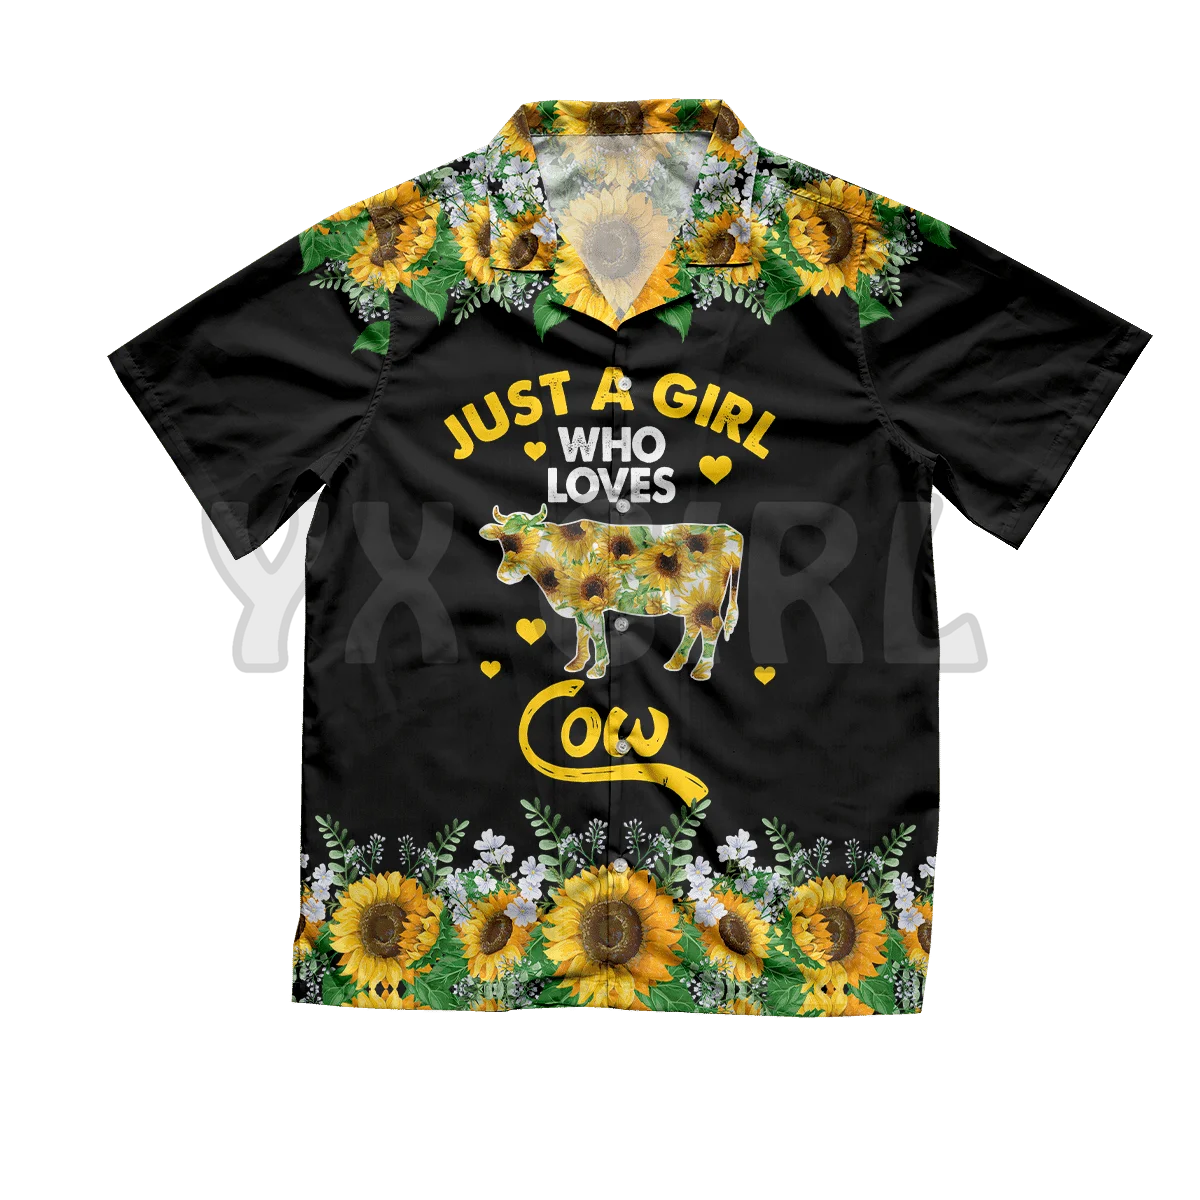 Sunflower Just a Girl Who Loves 3D All Over Printed Hawaiian Shirt Men's For Women's Harajuku Casual Shirt Unisex yx girl skull and sunflowers rompers 3d all over printed rompers summer women s bohemia clothes